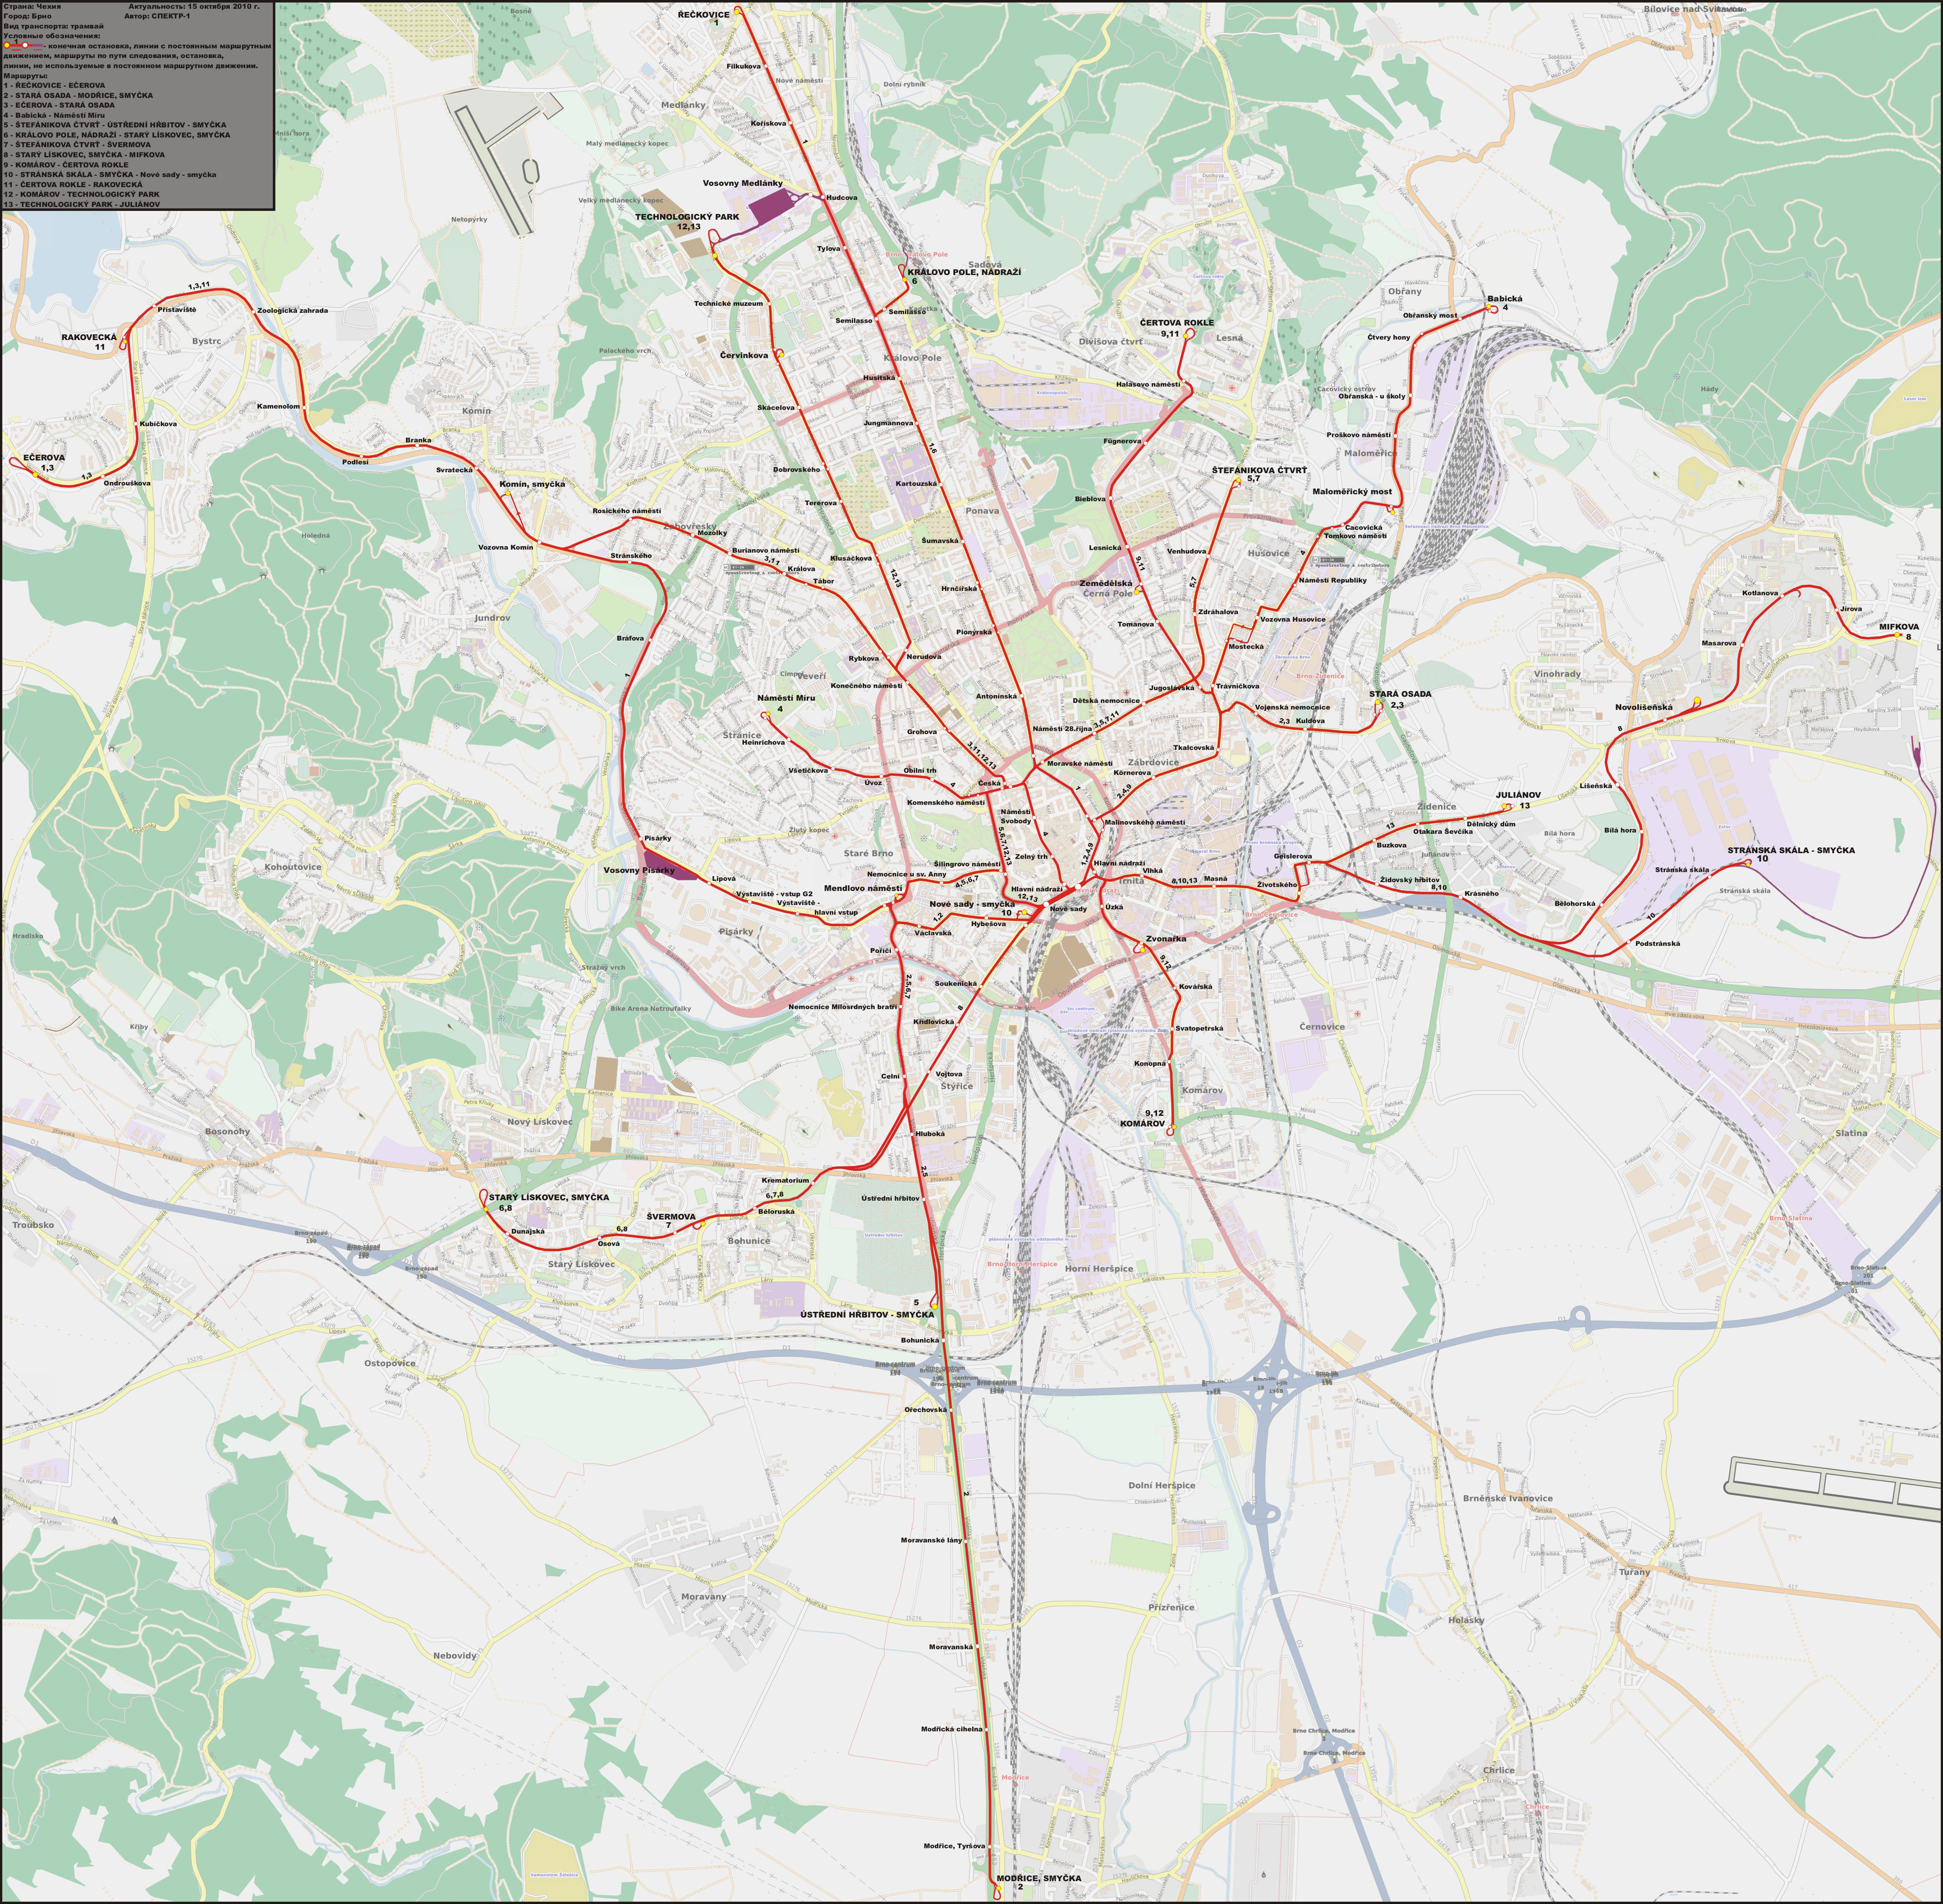 Brno — Maps / Mapy a plánky; Maps made with OpenStreetMap